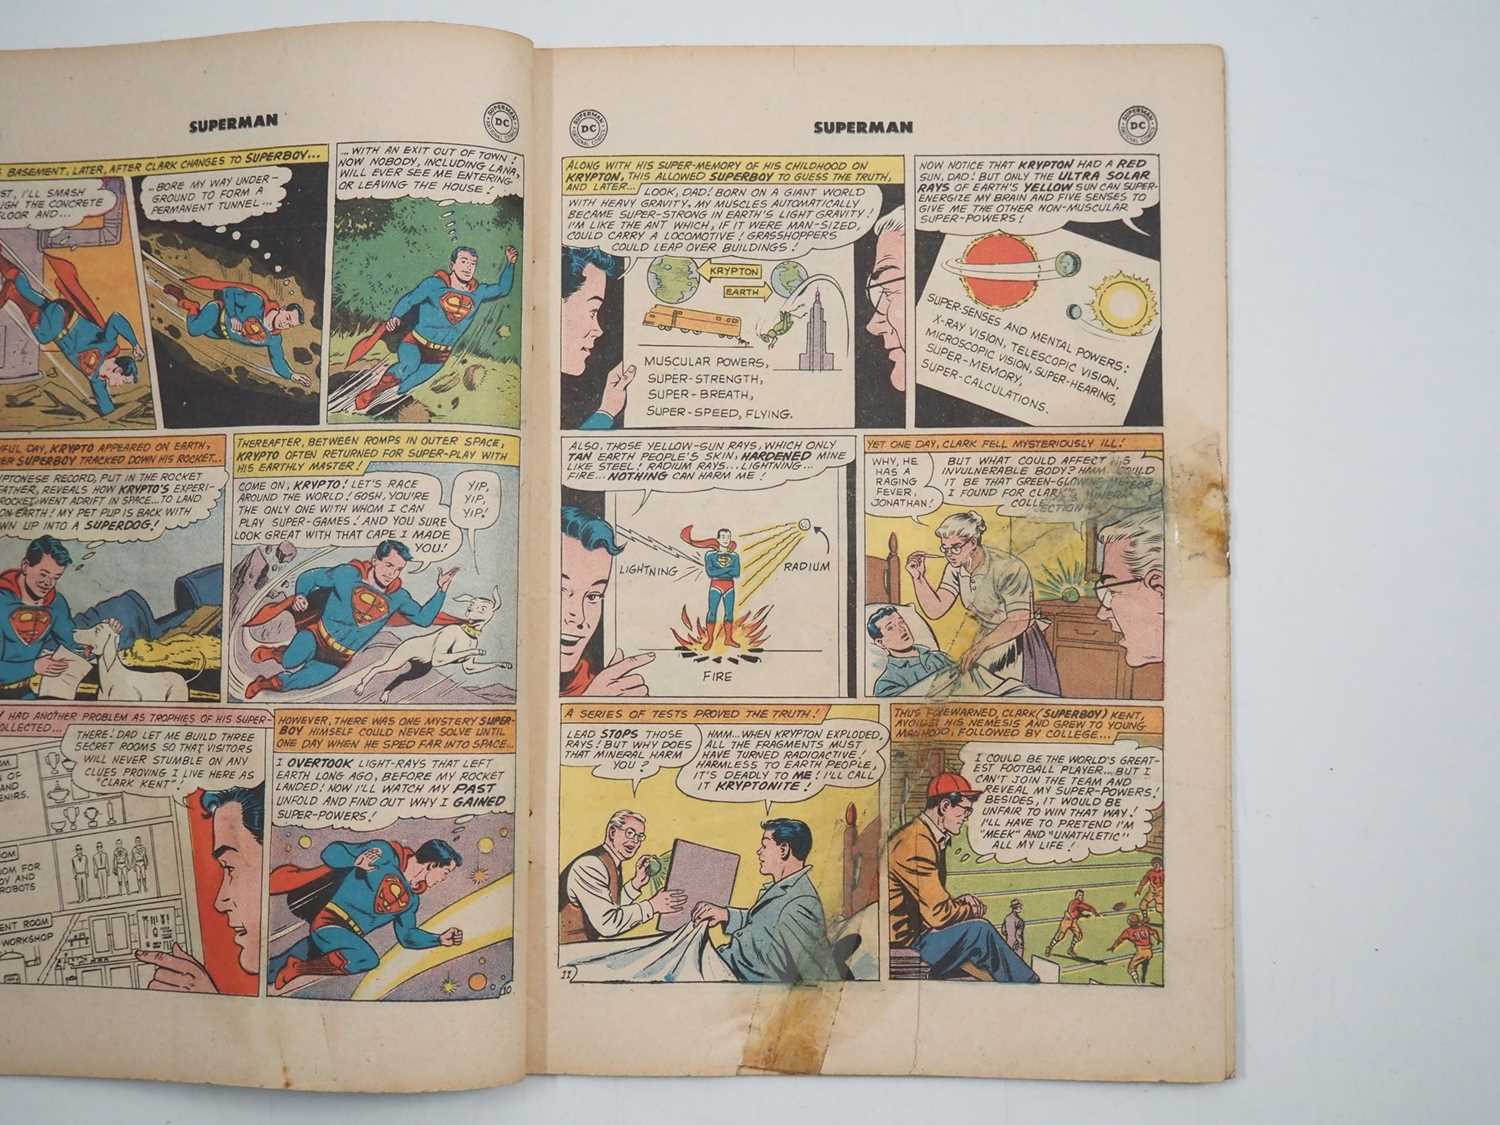 SUPERMAN #146 & 147 (2 in Lot) - (1961 - DC) - "The Complete Story of Superman's Life" with - Image 3 of 4